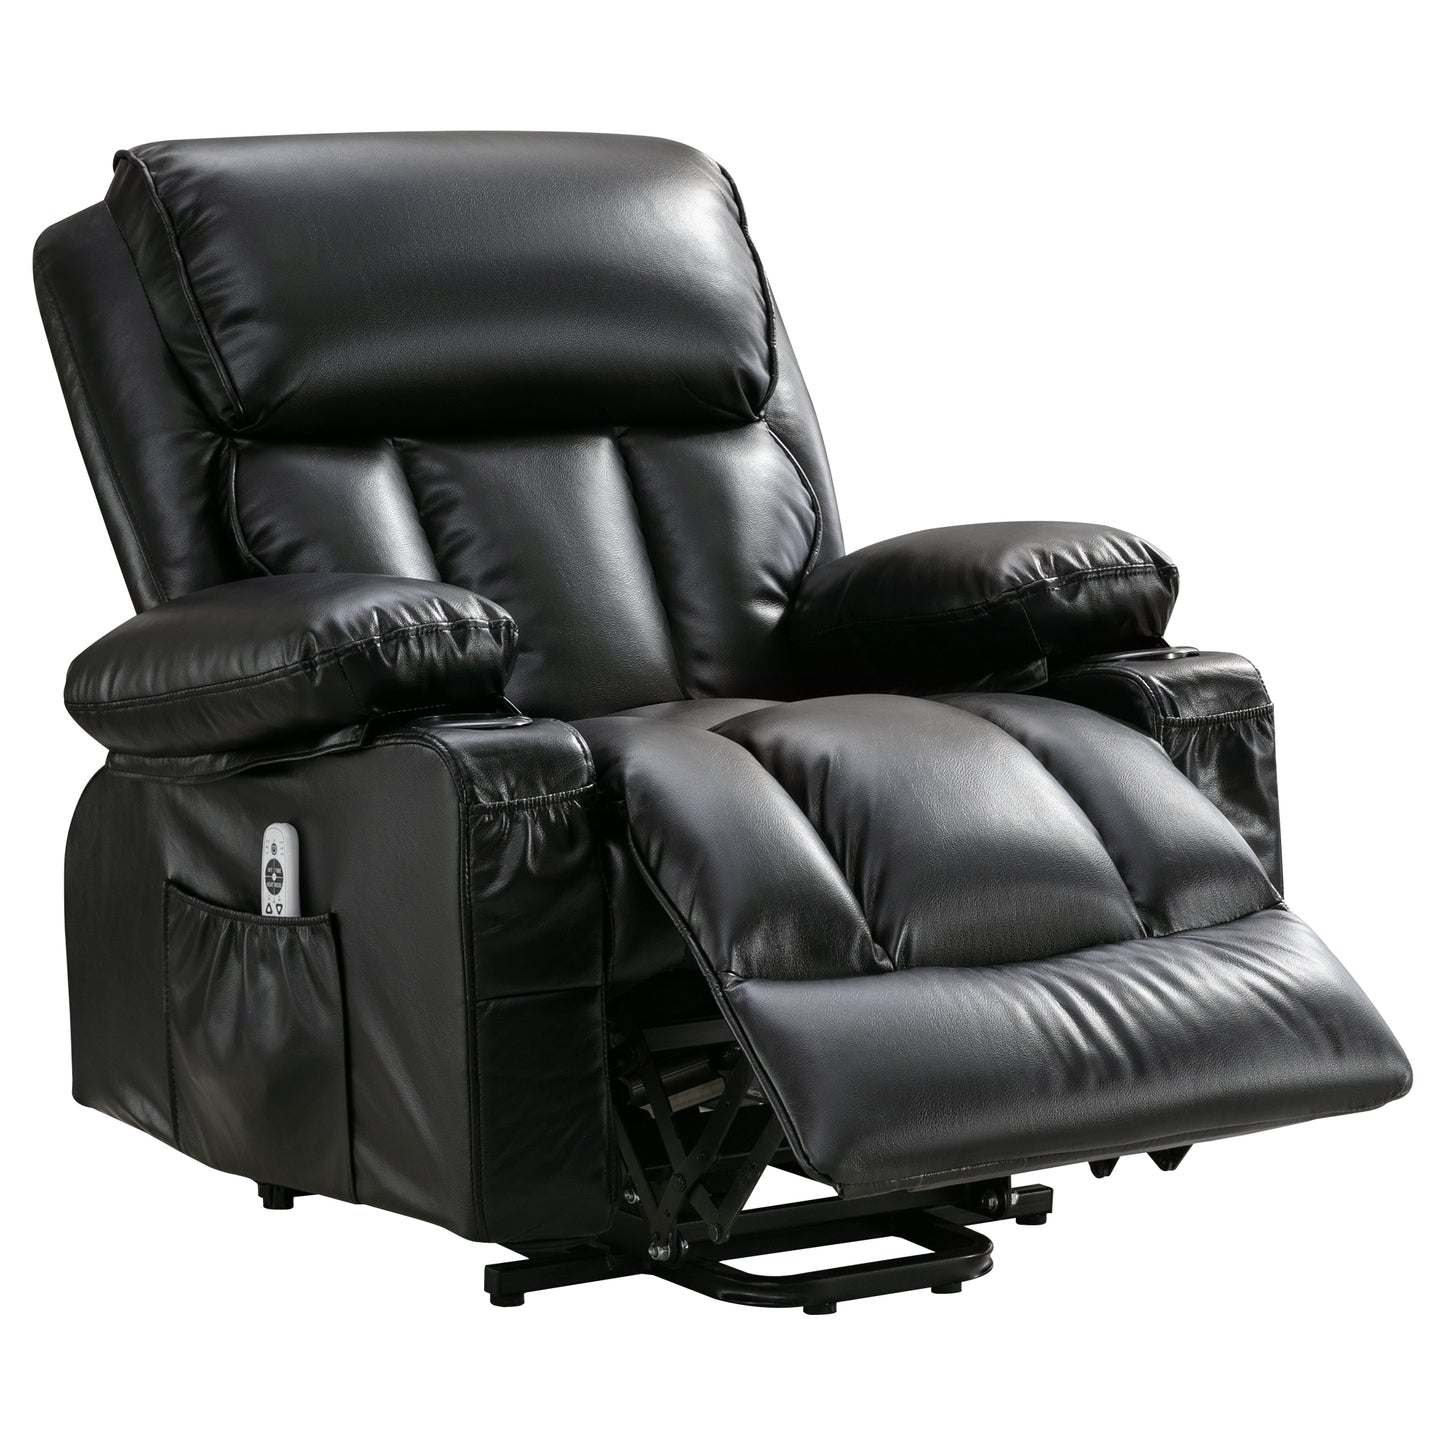 ComfortEase Ultra: The Ultimate Lift & Wellness Recliner with Heat, Massage, and Smart Features: BLACK